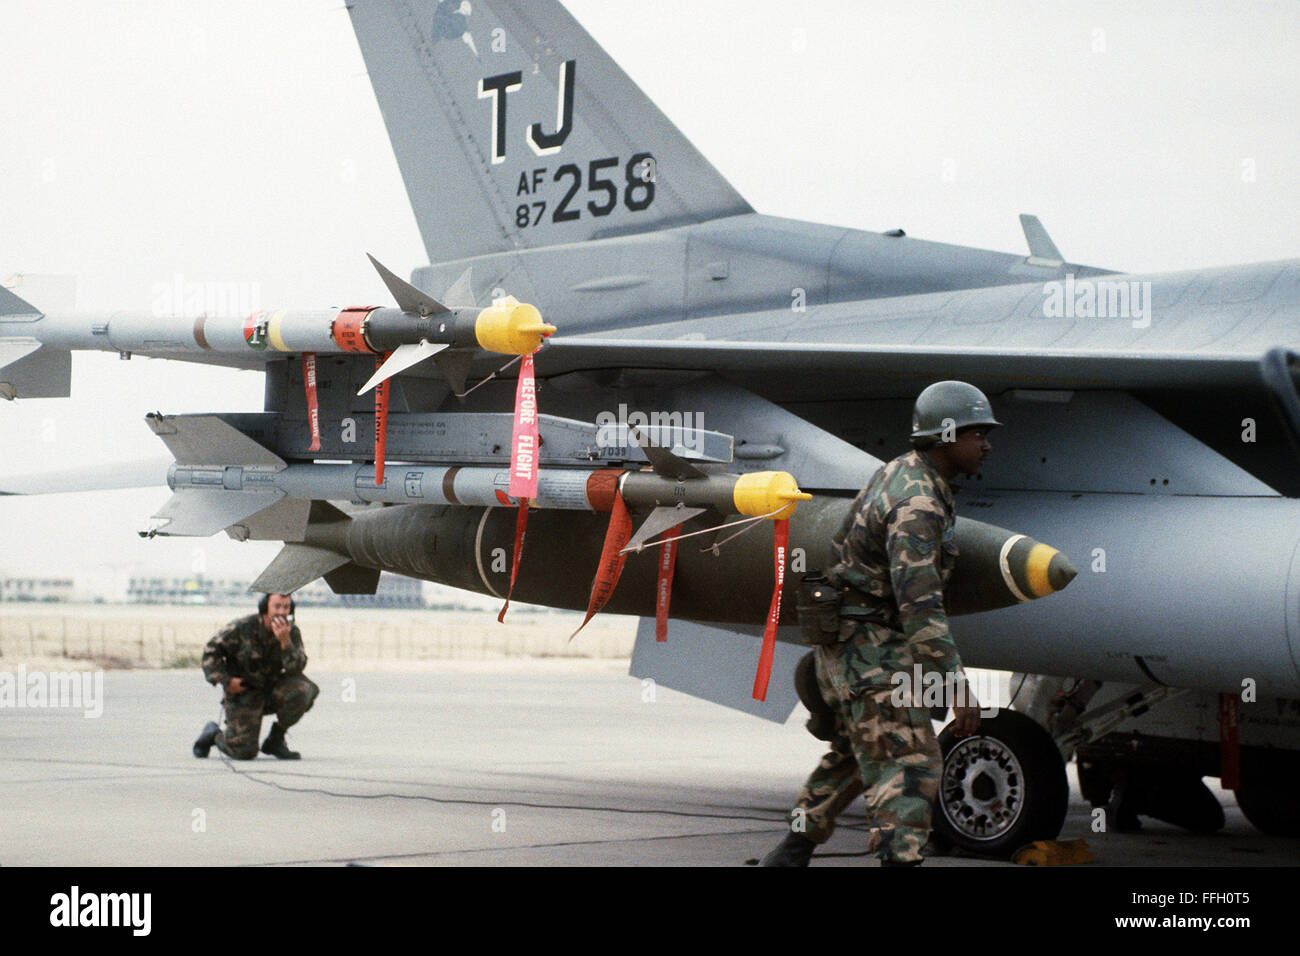 Members of the 401st Aircraft Generation Squadron load ordnance on a 401st Tactical Fighter Wing  F-16C Fighting Falcon aircraft in preparation for the first daylight strike against Iraqi targets during Operation Desert Storm.  The F-16C is armed with AIM-9 Sidewinder missiles and a Mark 84 2,000-pound bomb. Stock Photo